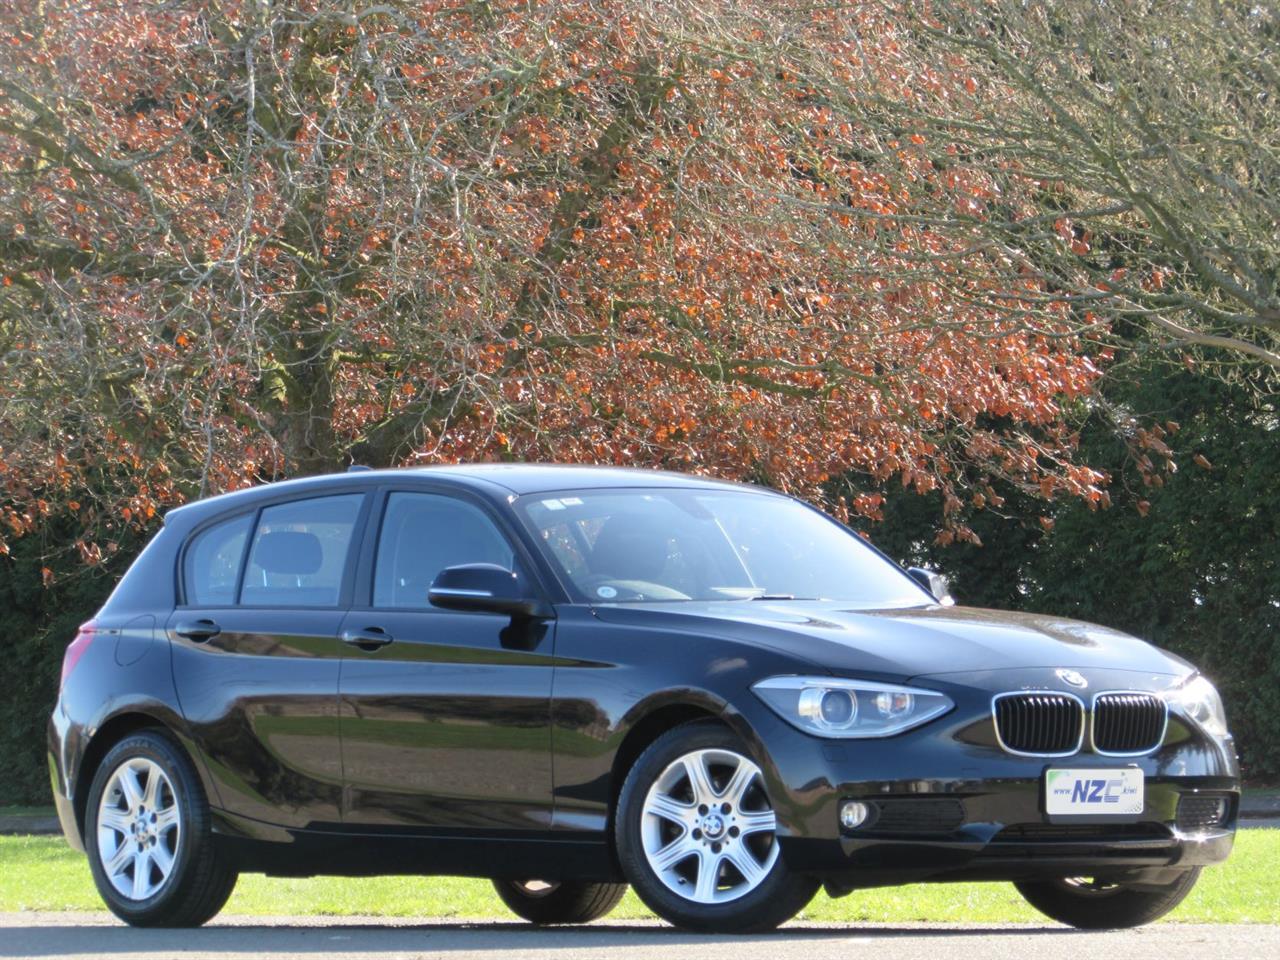 NZC best hot price for 2014 BMW 116I in Christchurch